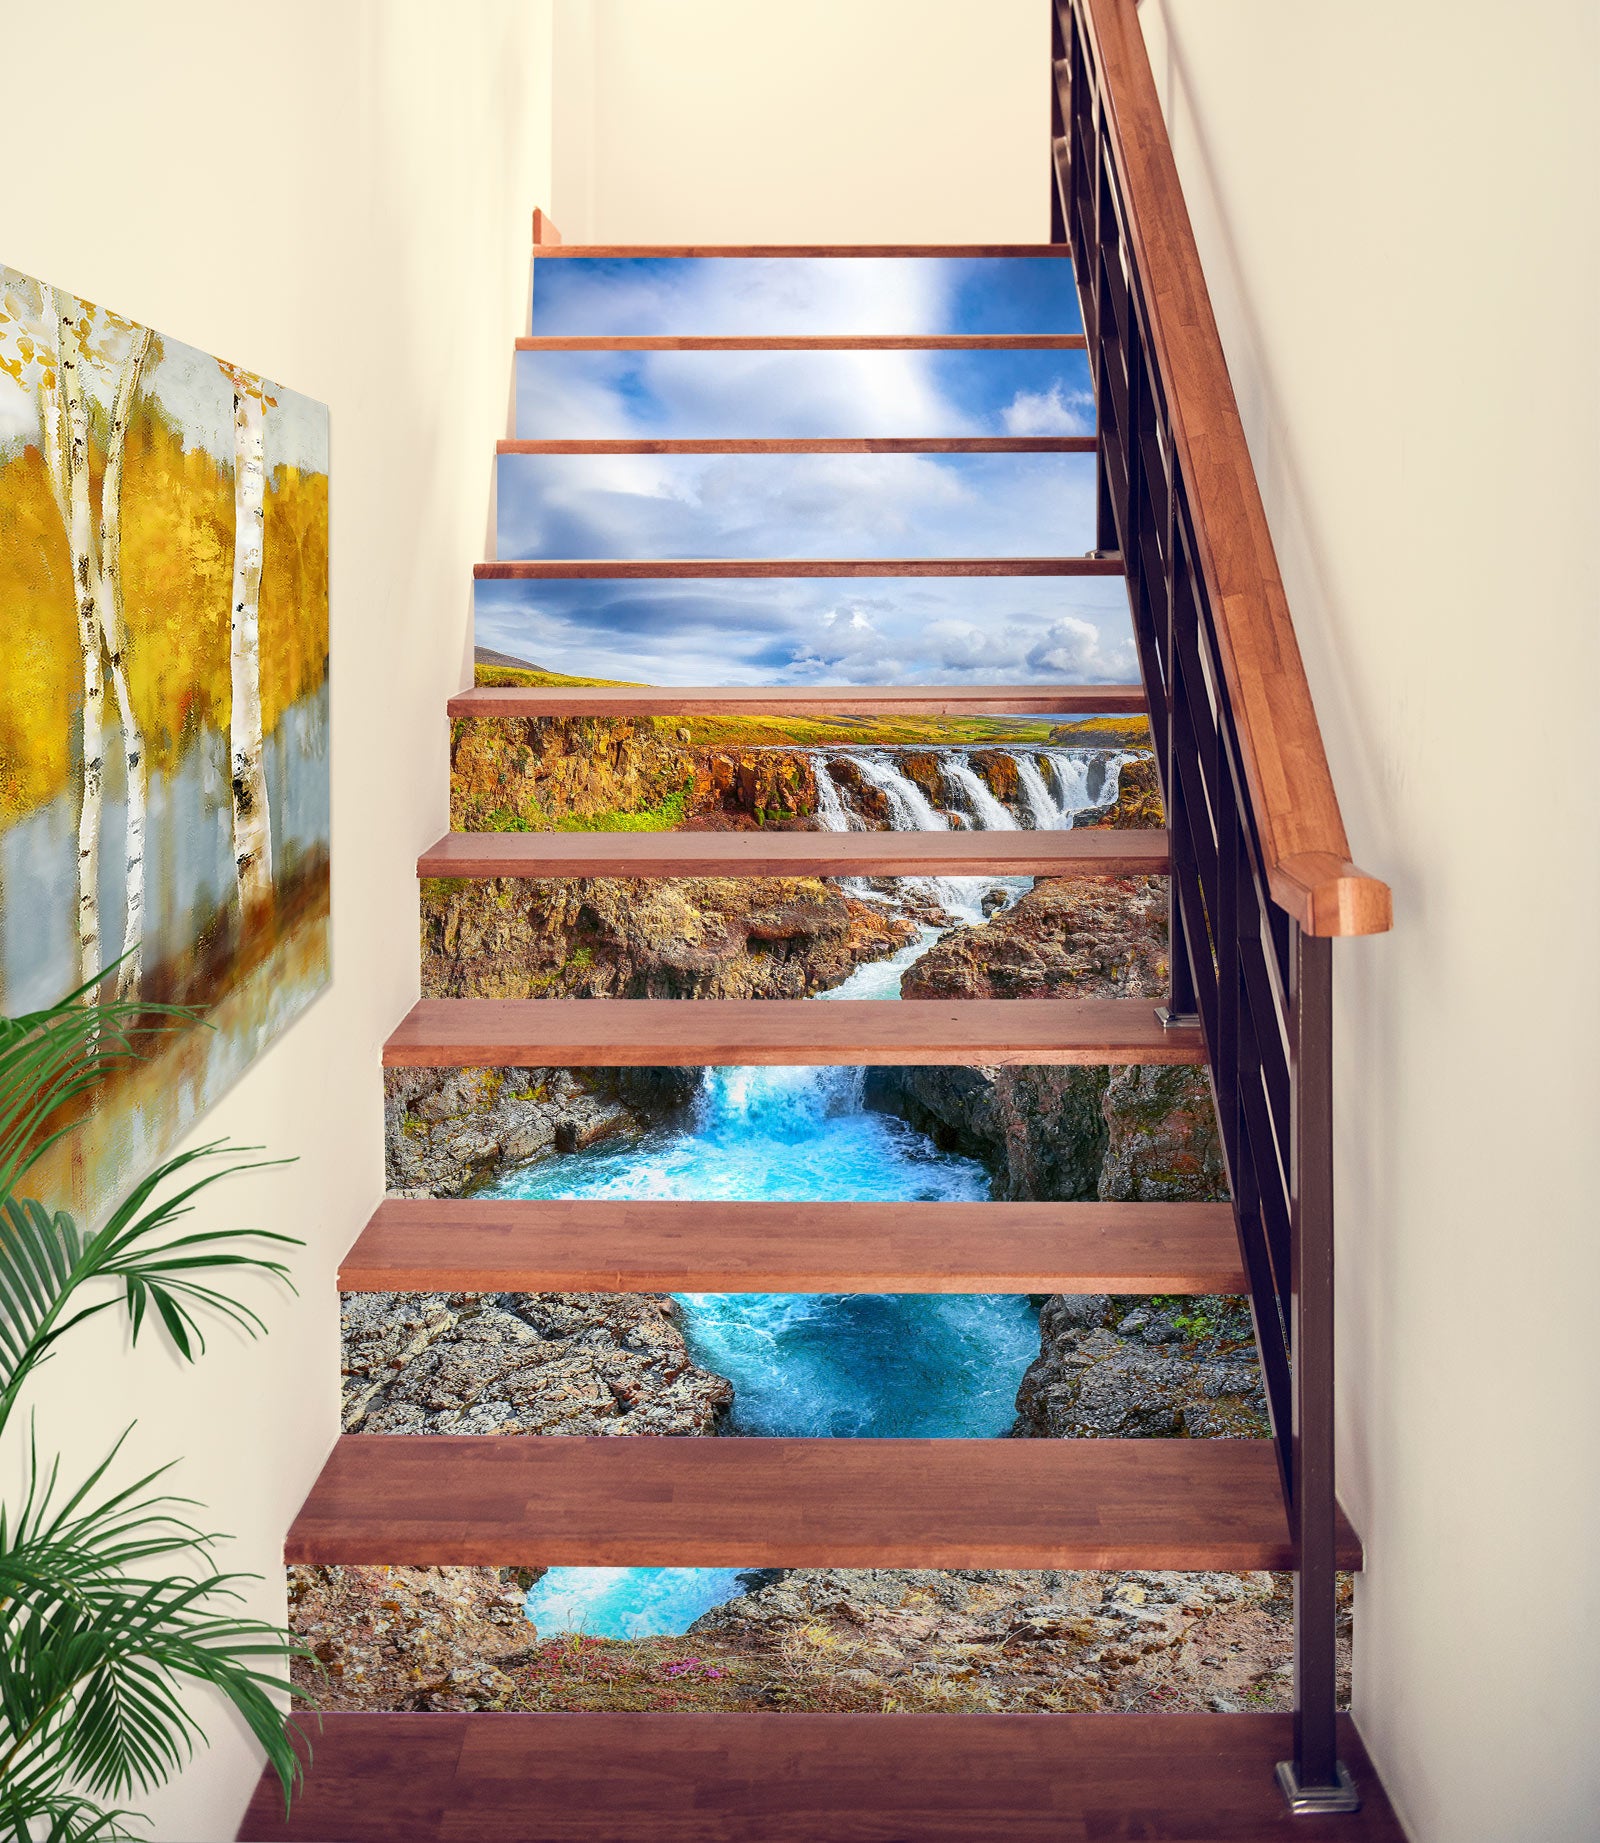 3D Waterfall View 388 Stair Risers